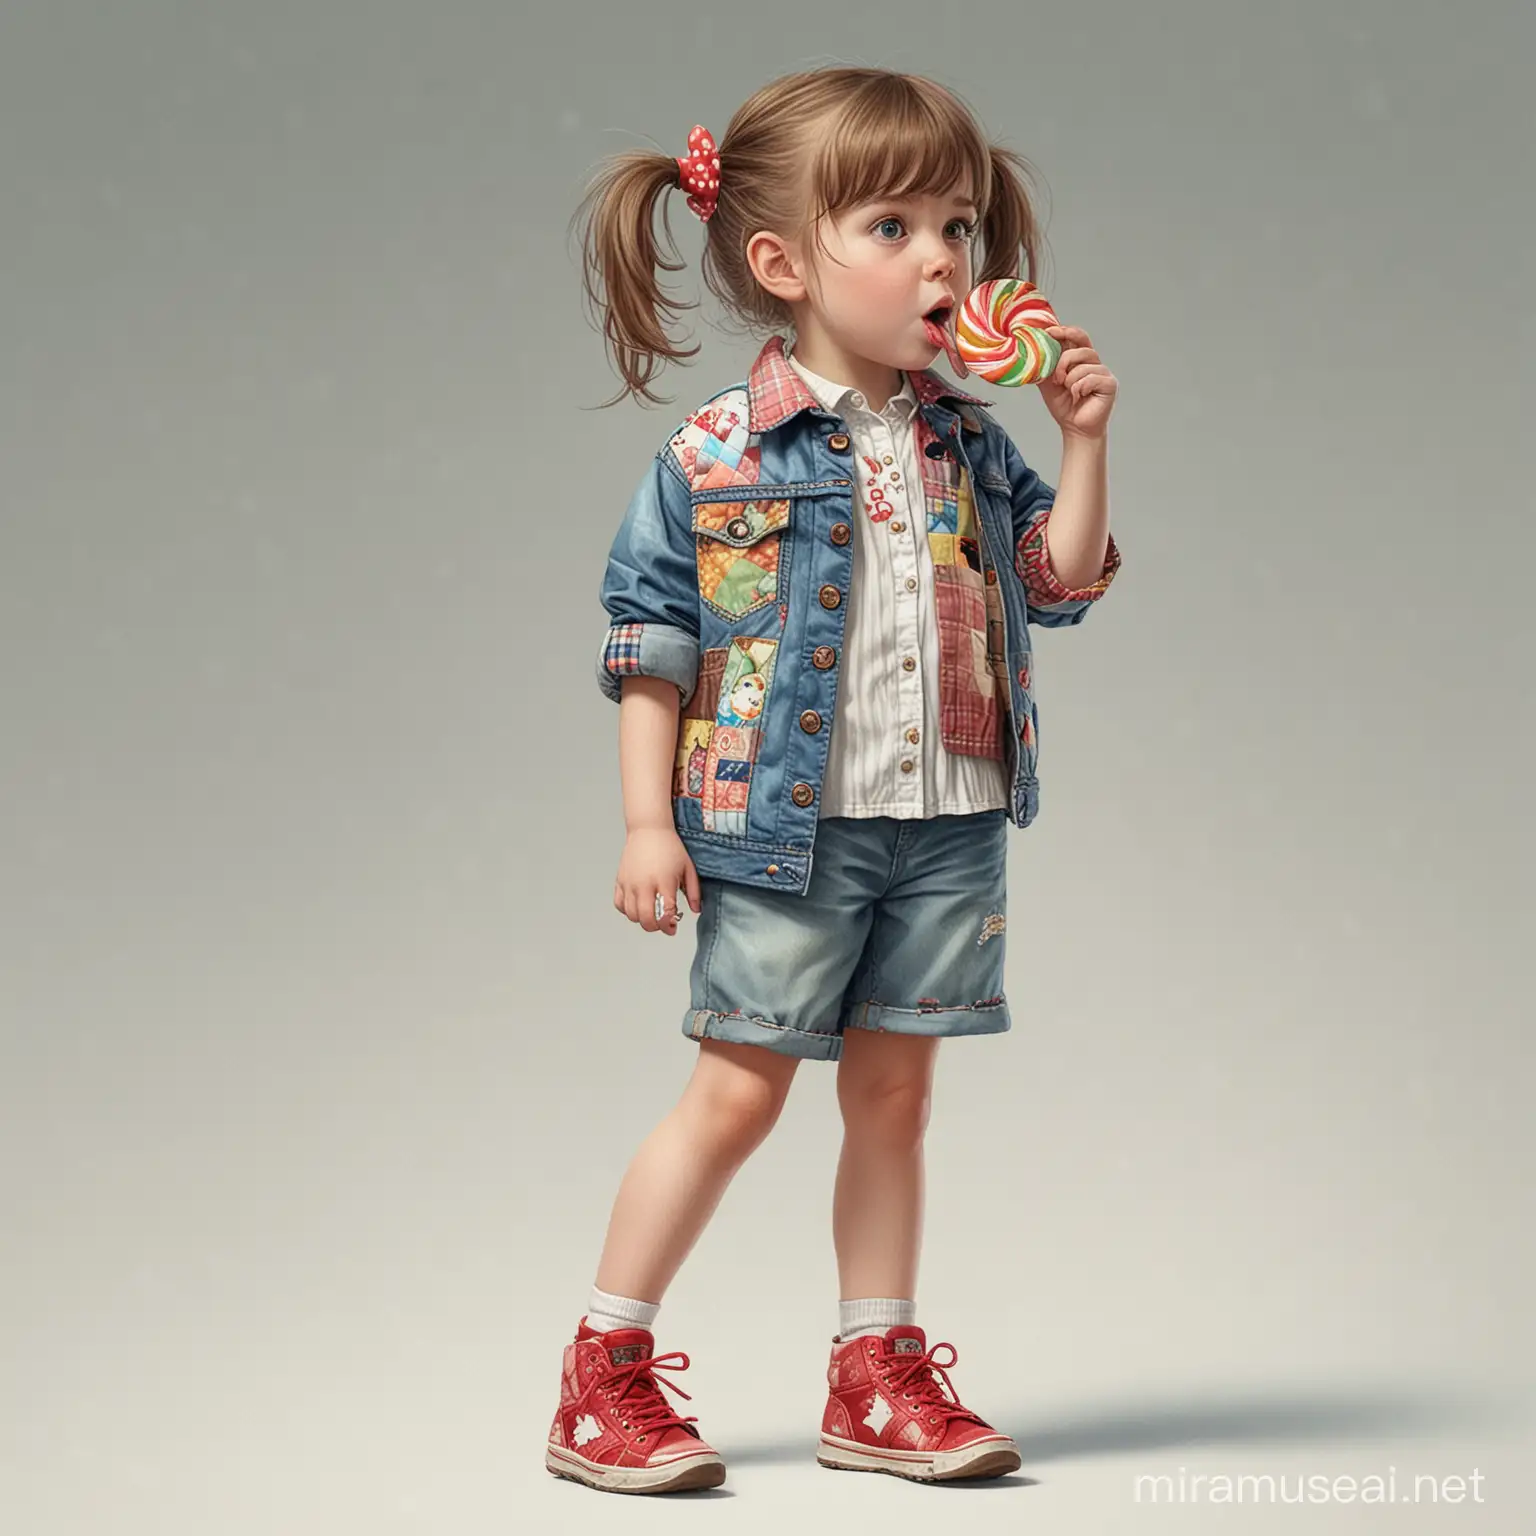 Adorable Little Girl in Patchwork Jeanscoat Enjoying a Sweet Treat